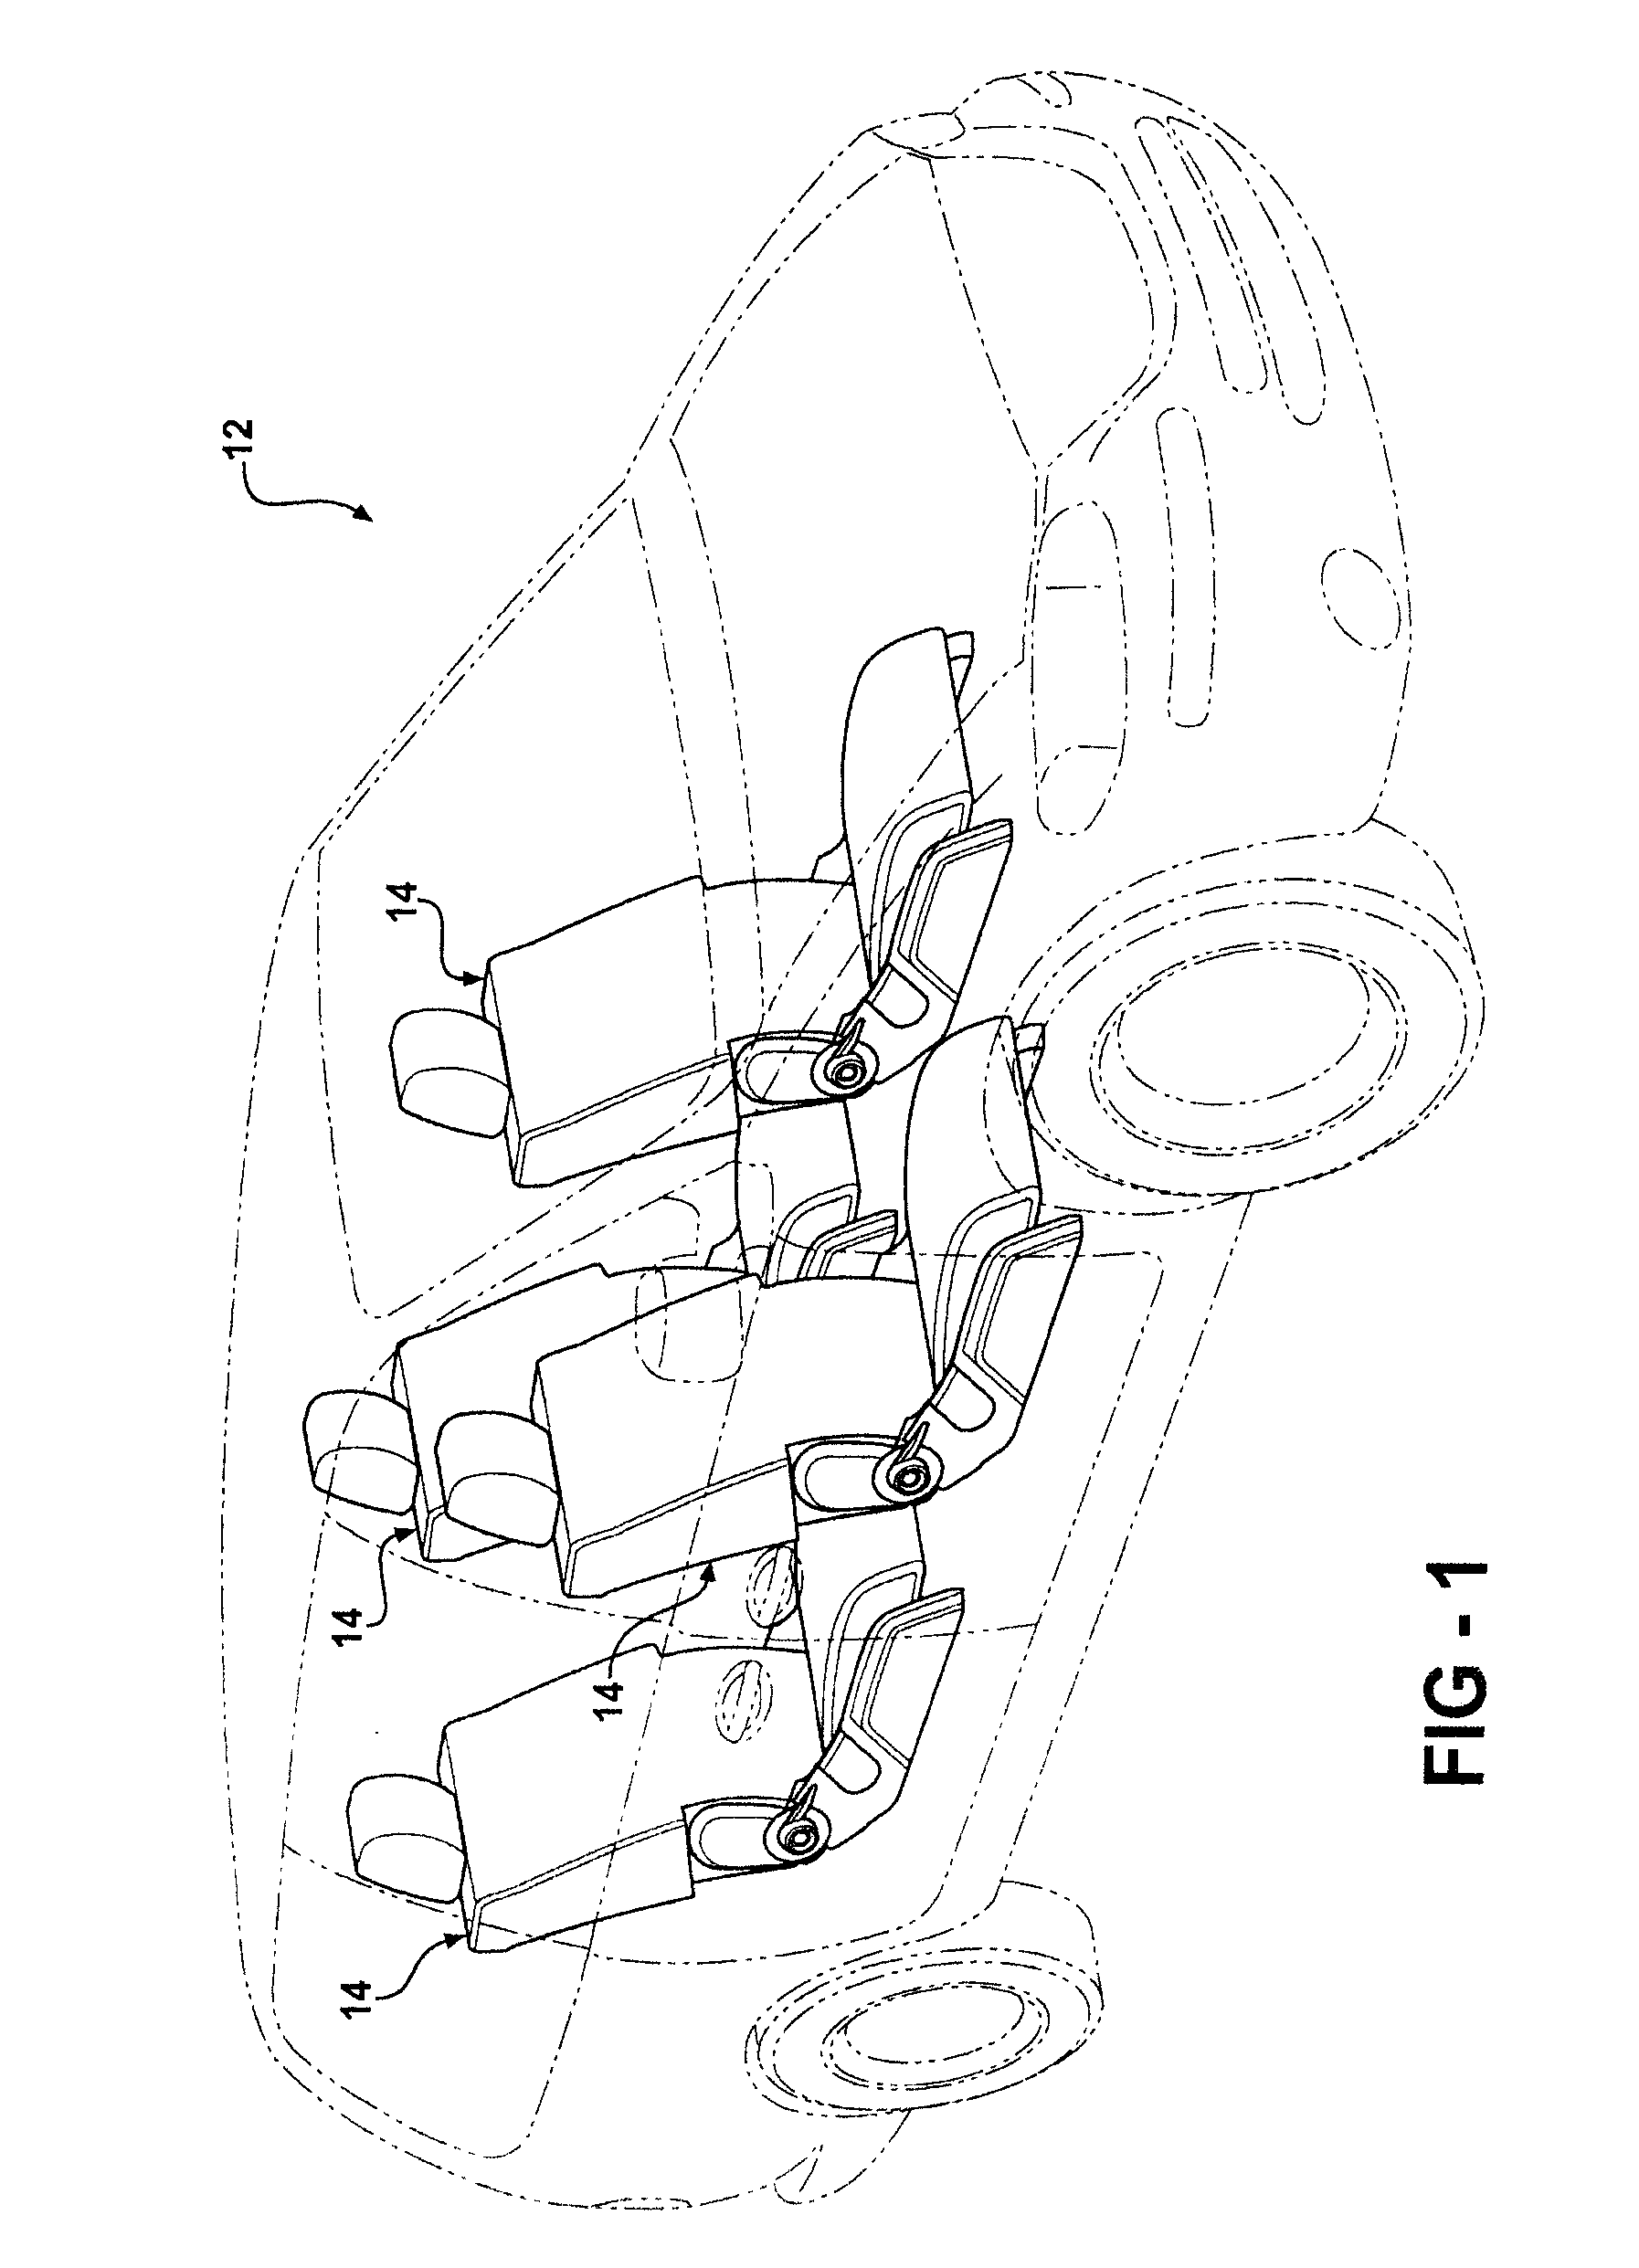 Seat Recliner Mechanism With Fold-Flat Feature